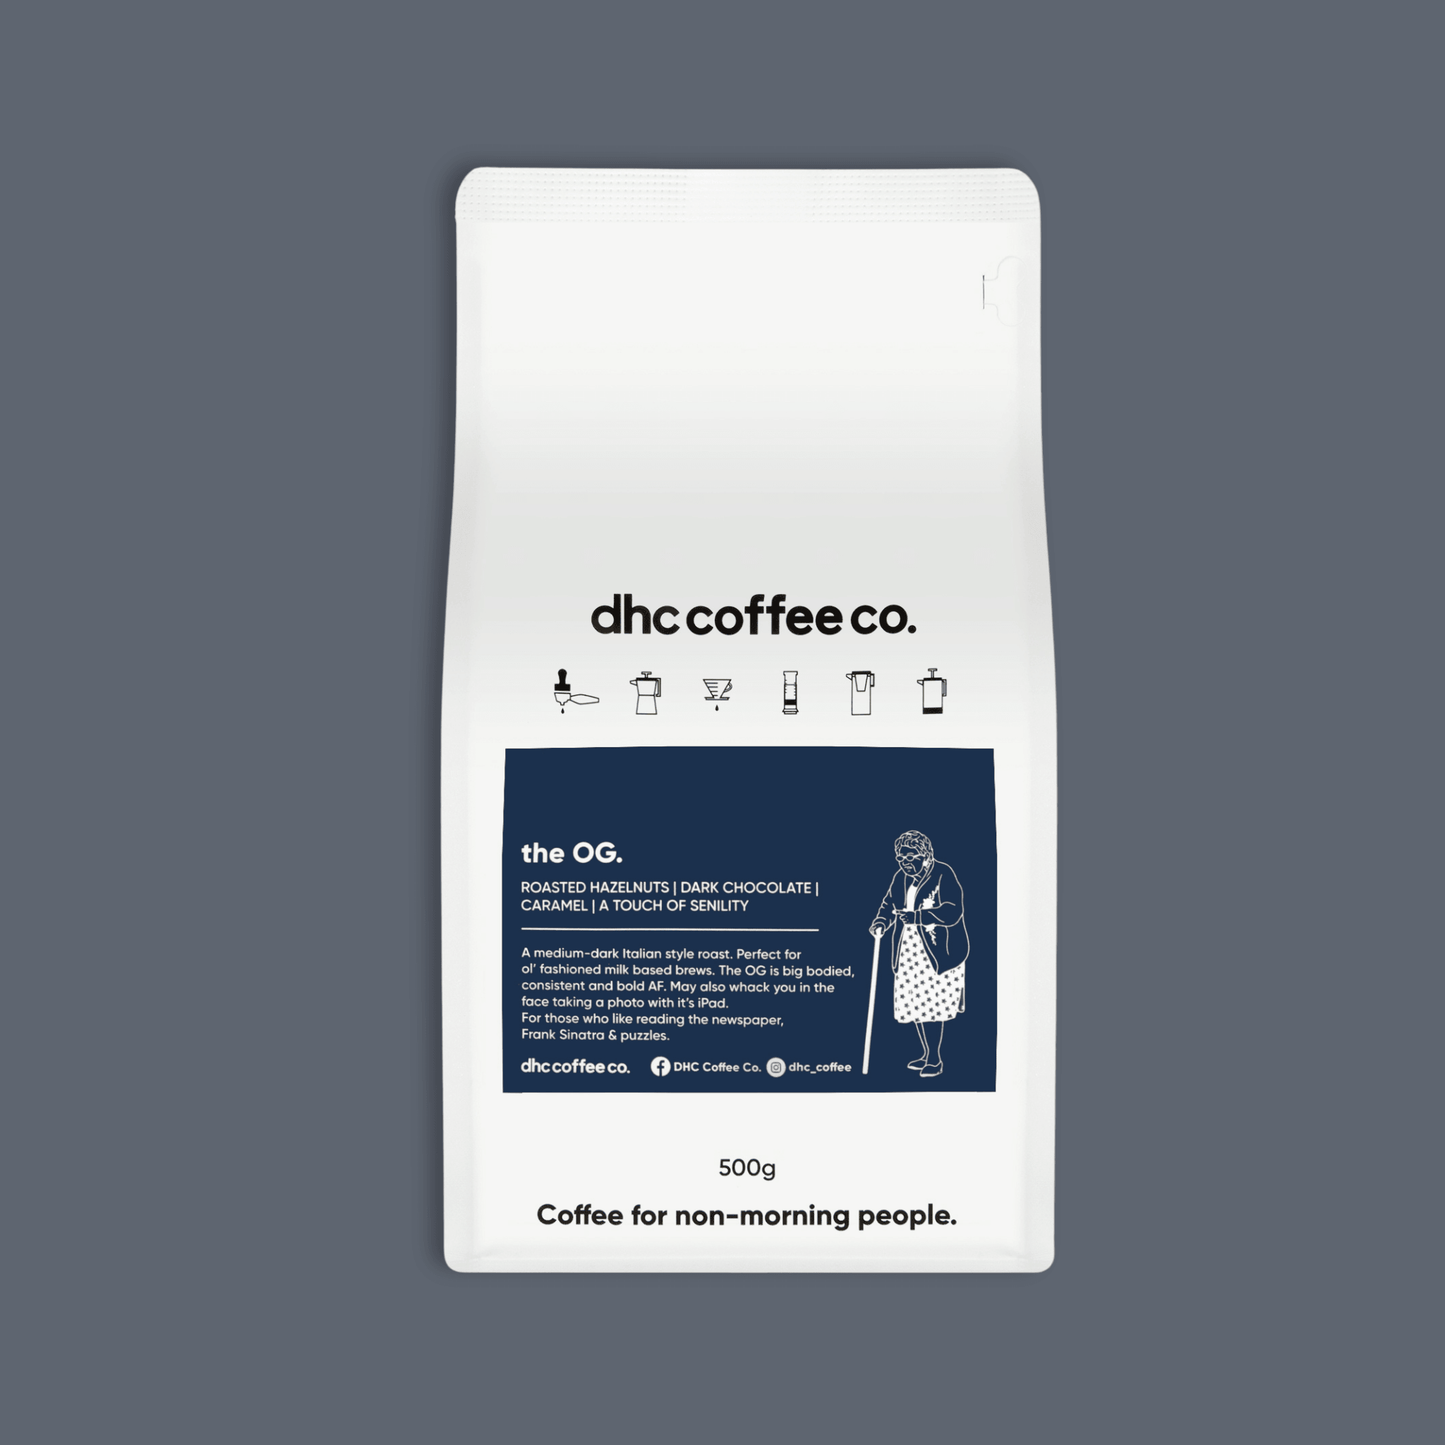 Airscape Kilo 8" Large Coffee Canister + 500g of The OG Coffee - dhc coffee co.